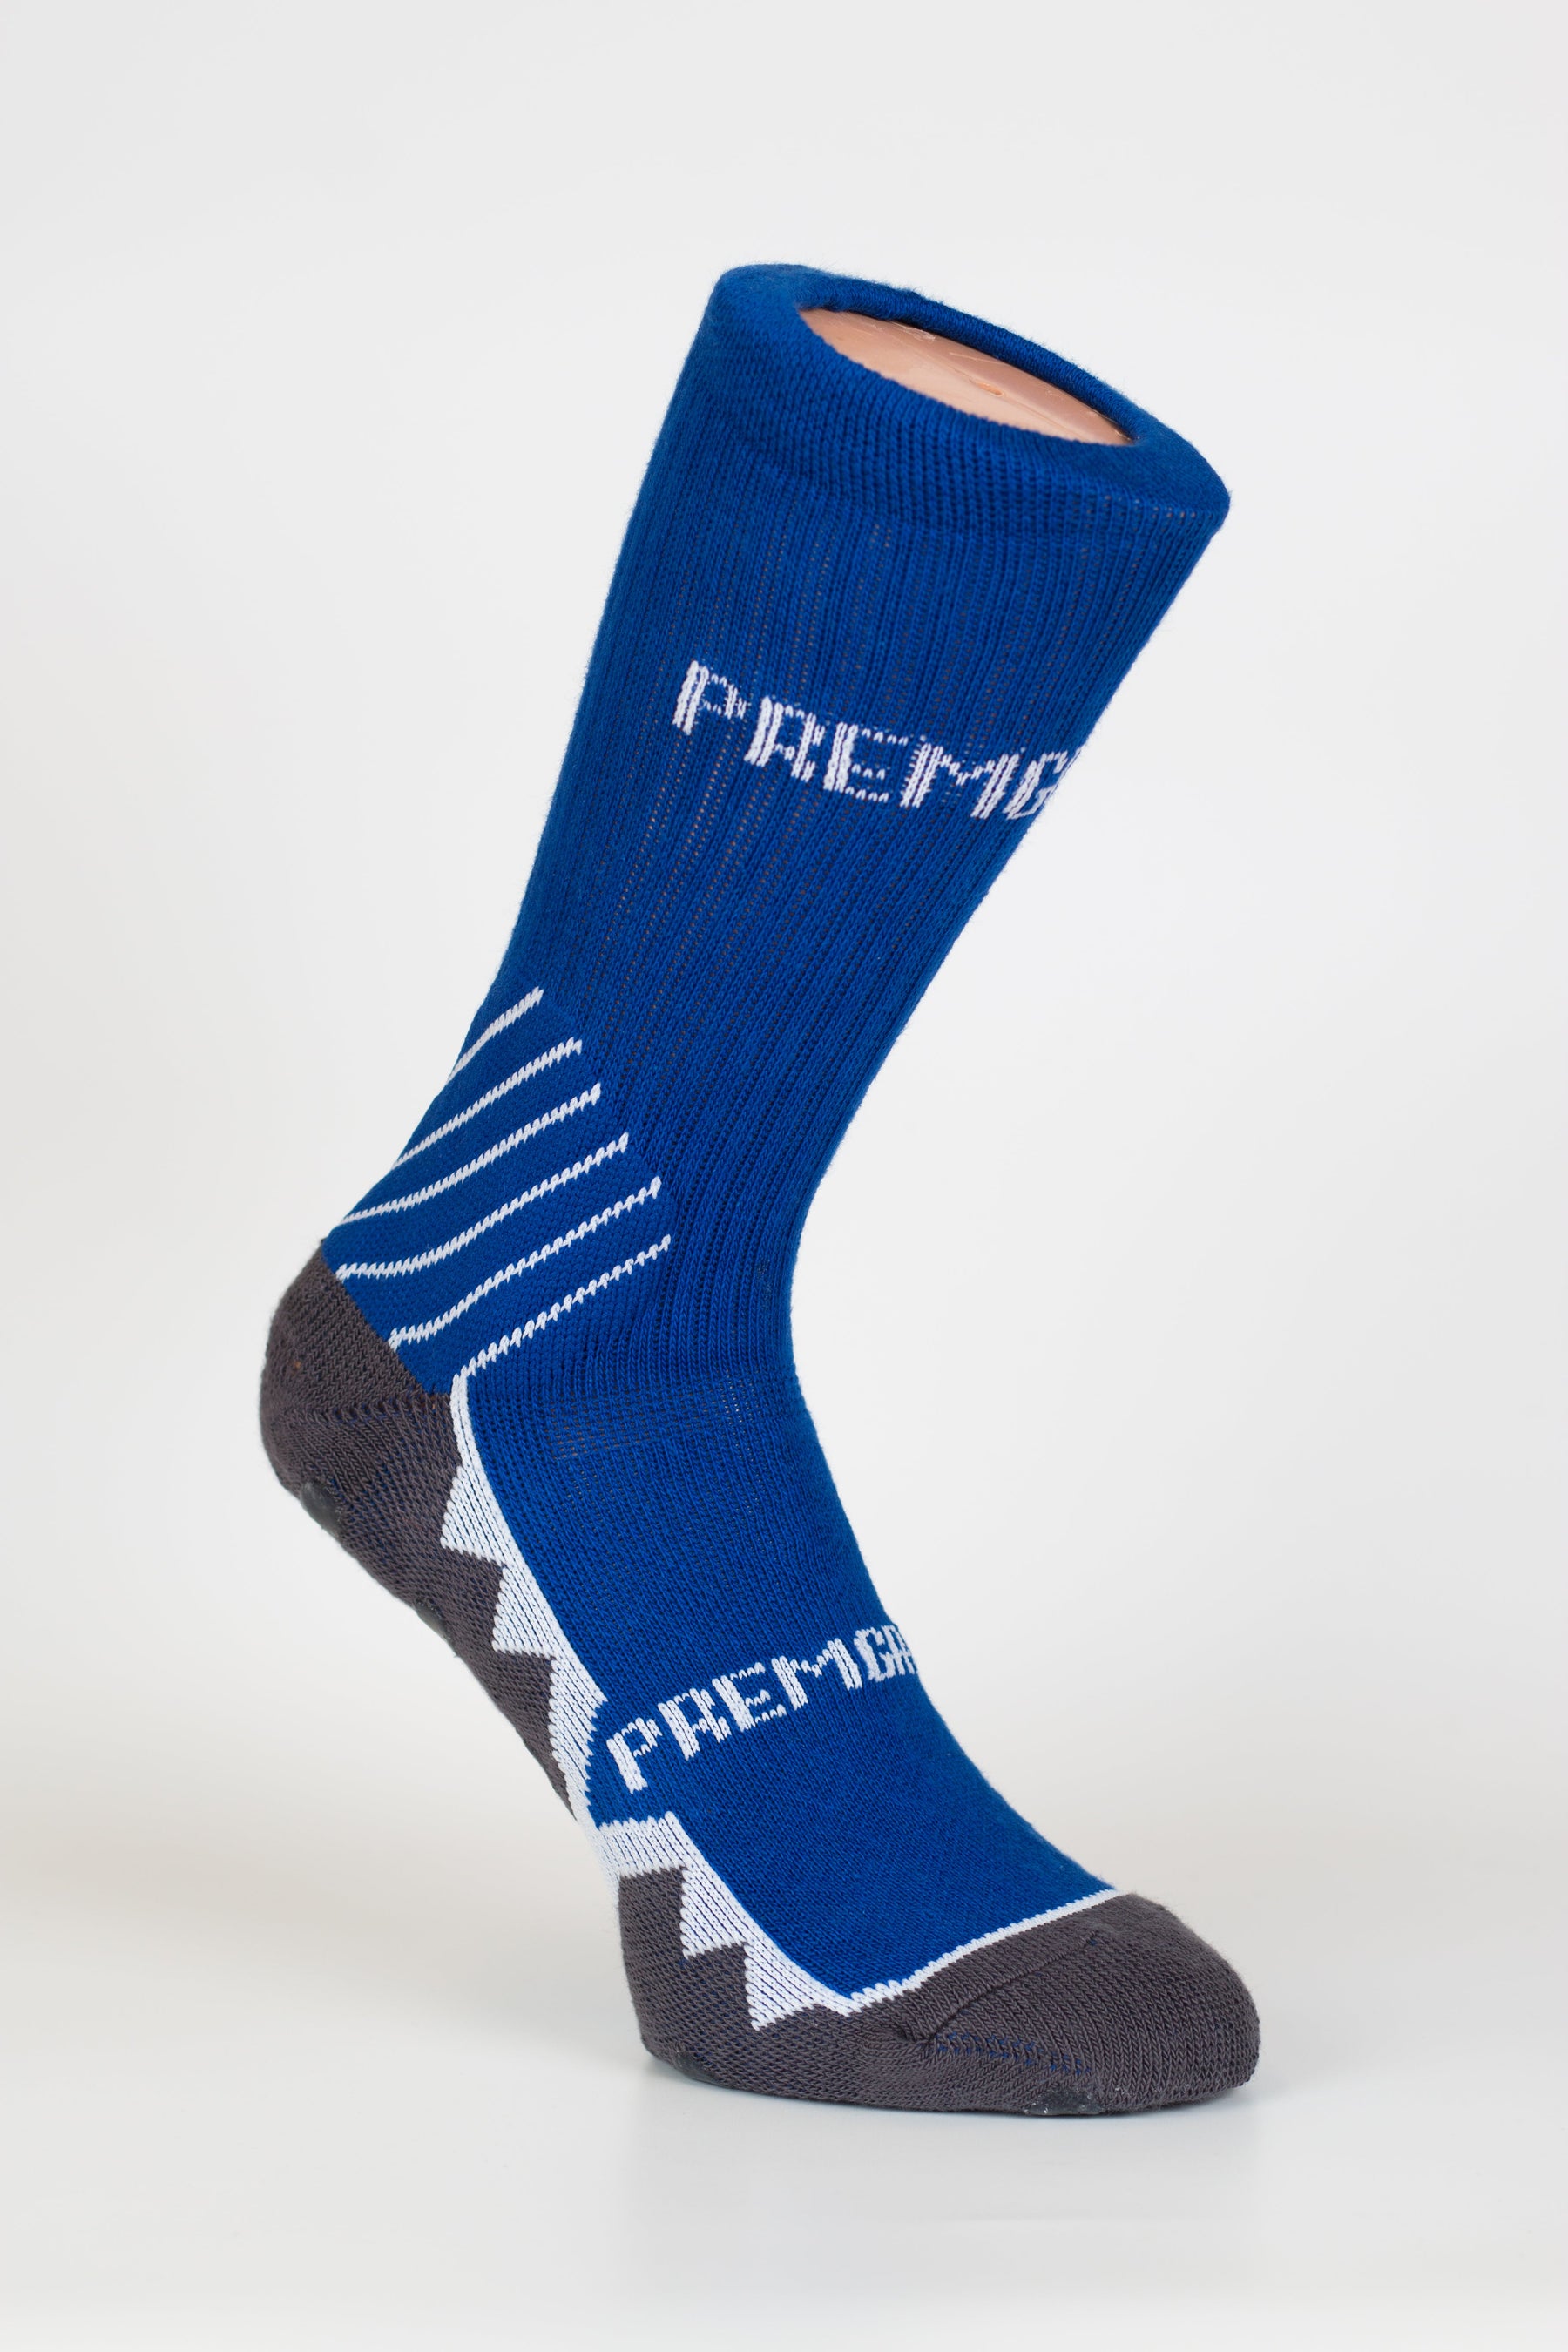 PREMGRIPP CREW SOCK, WITH PATENTED TECHNOLOGY, ROYAL BLUE. - Fanatics Supplies